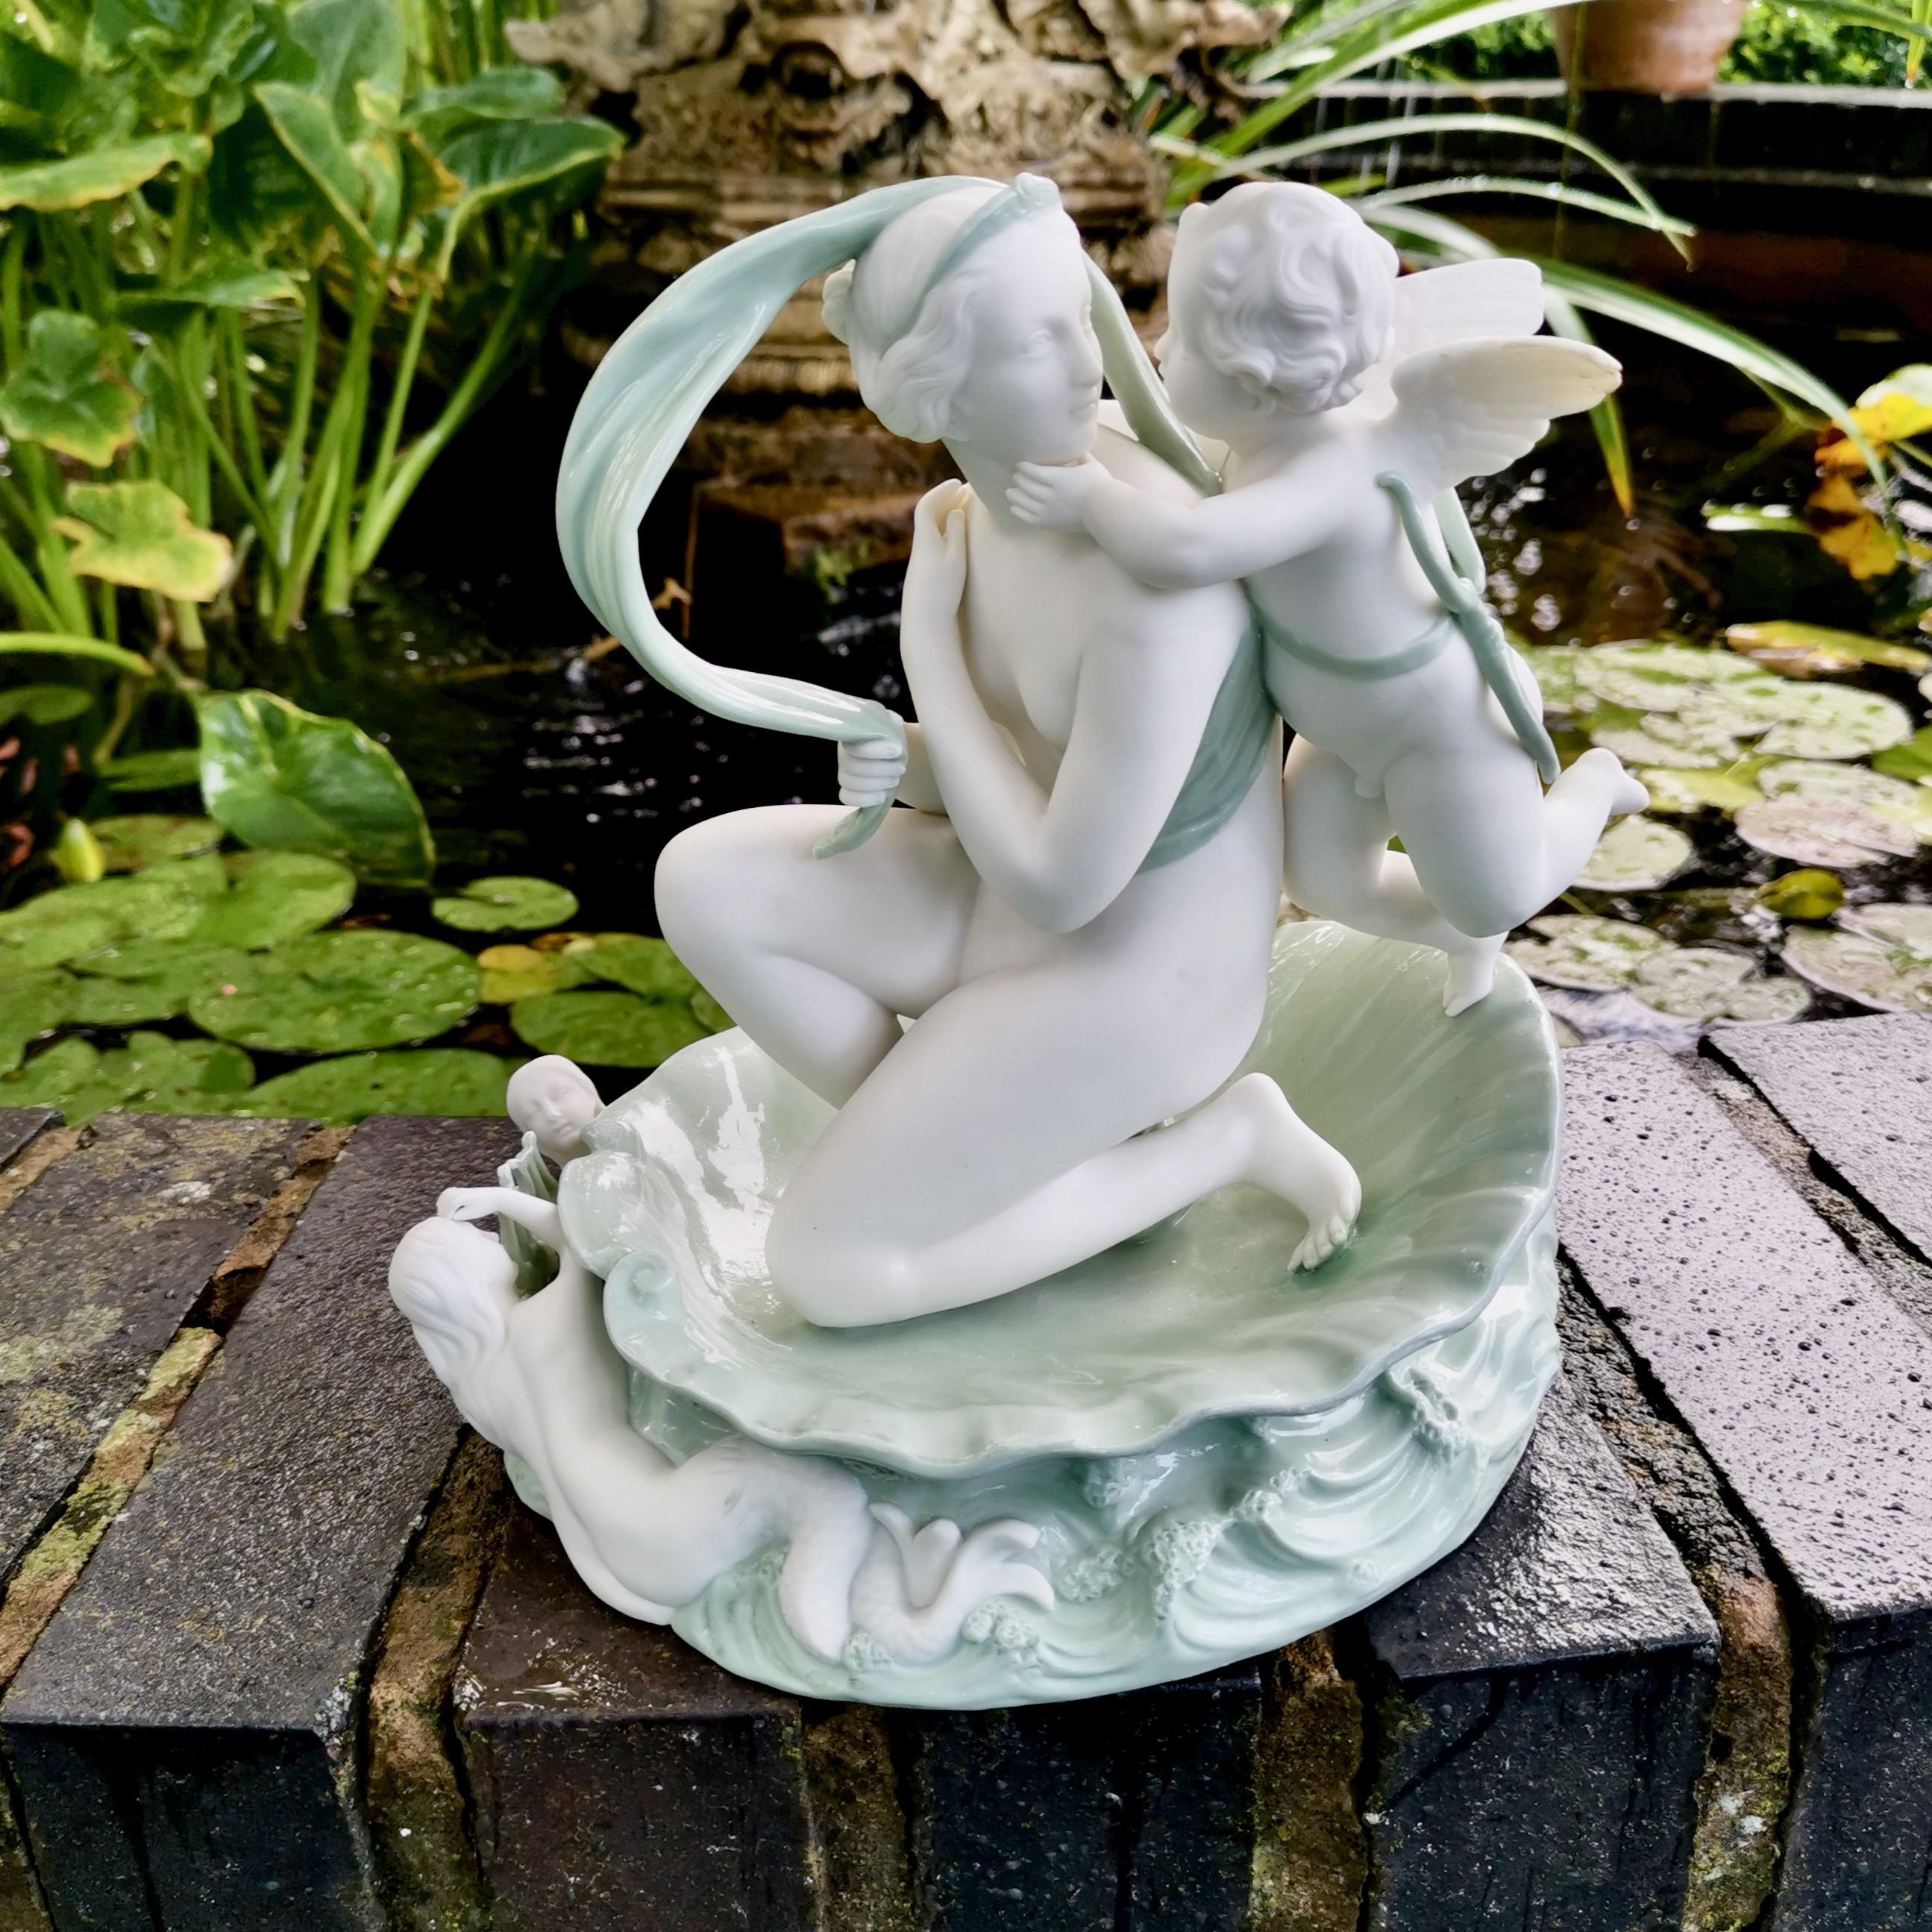 This is a beautiful celadon parian porcelain figure group made by Minton in 1861, which was the Victorian era. The group is of Venus and her son Cupid, seated in a shell.

Minton was one of the pioneers of English china production alongside other